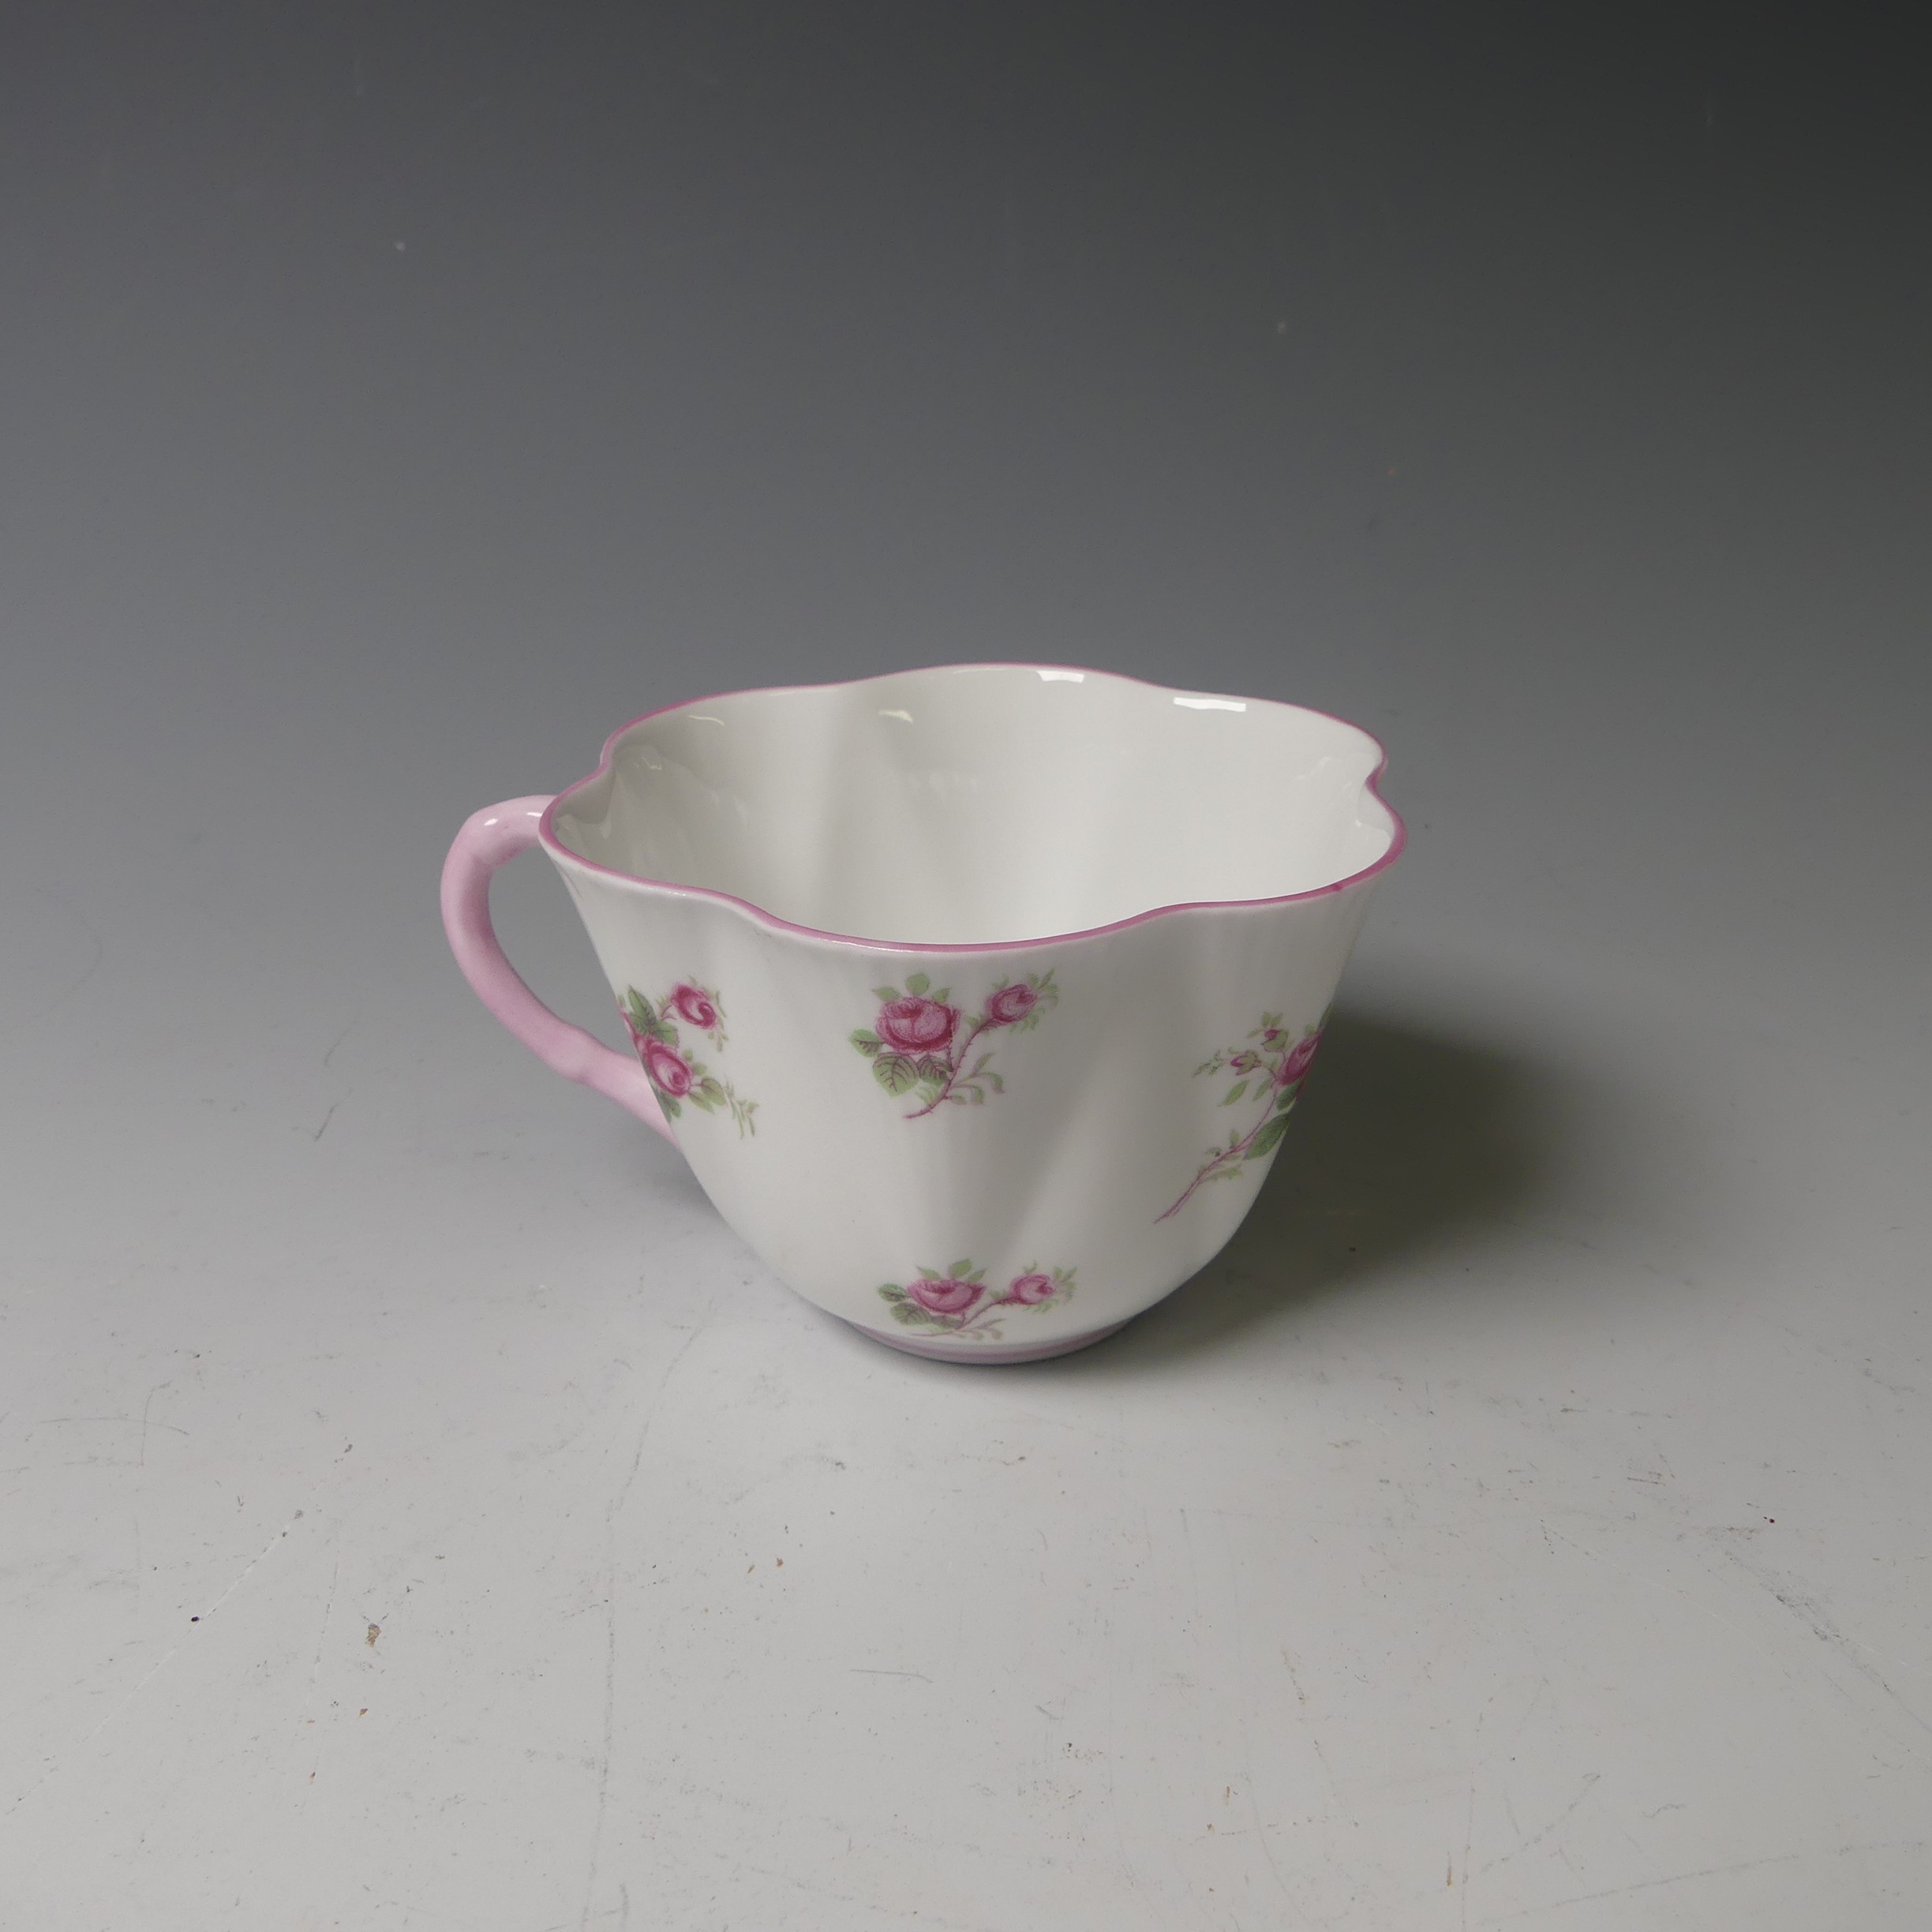 A Shelley 'Bridal Rose' pattern Tea Set, comprising six Cups and Saucers, Tea Plates, one broken, - Image 9 of 16